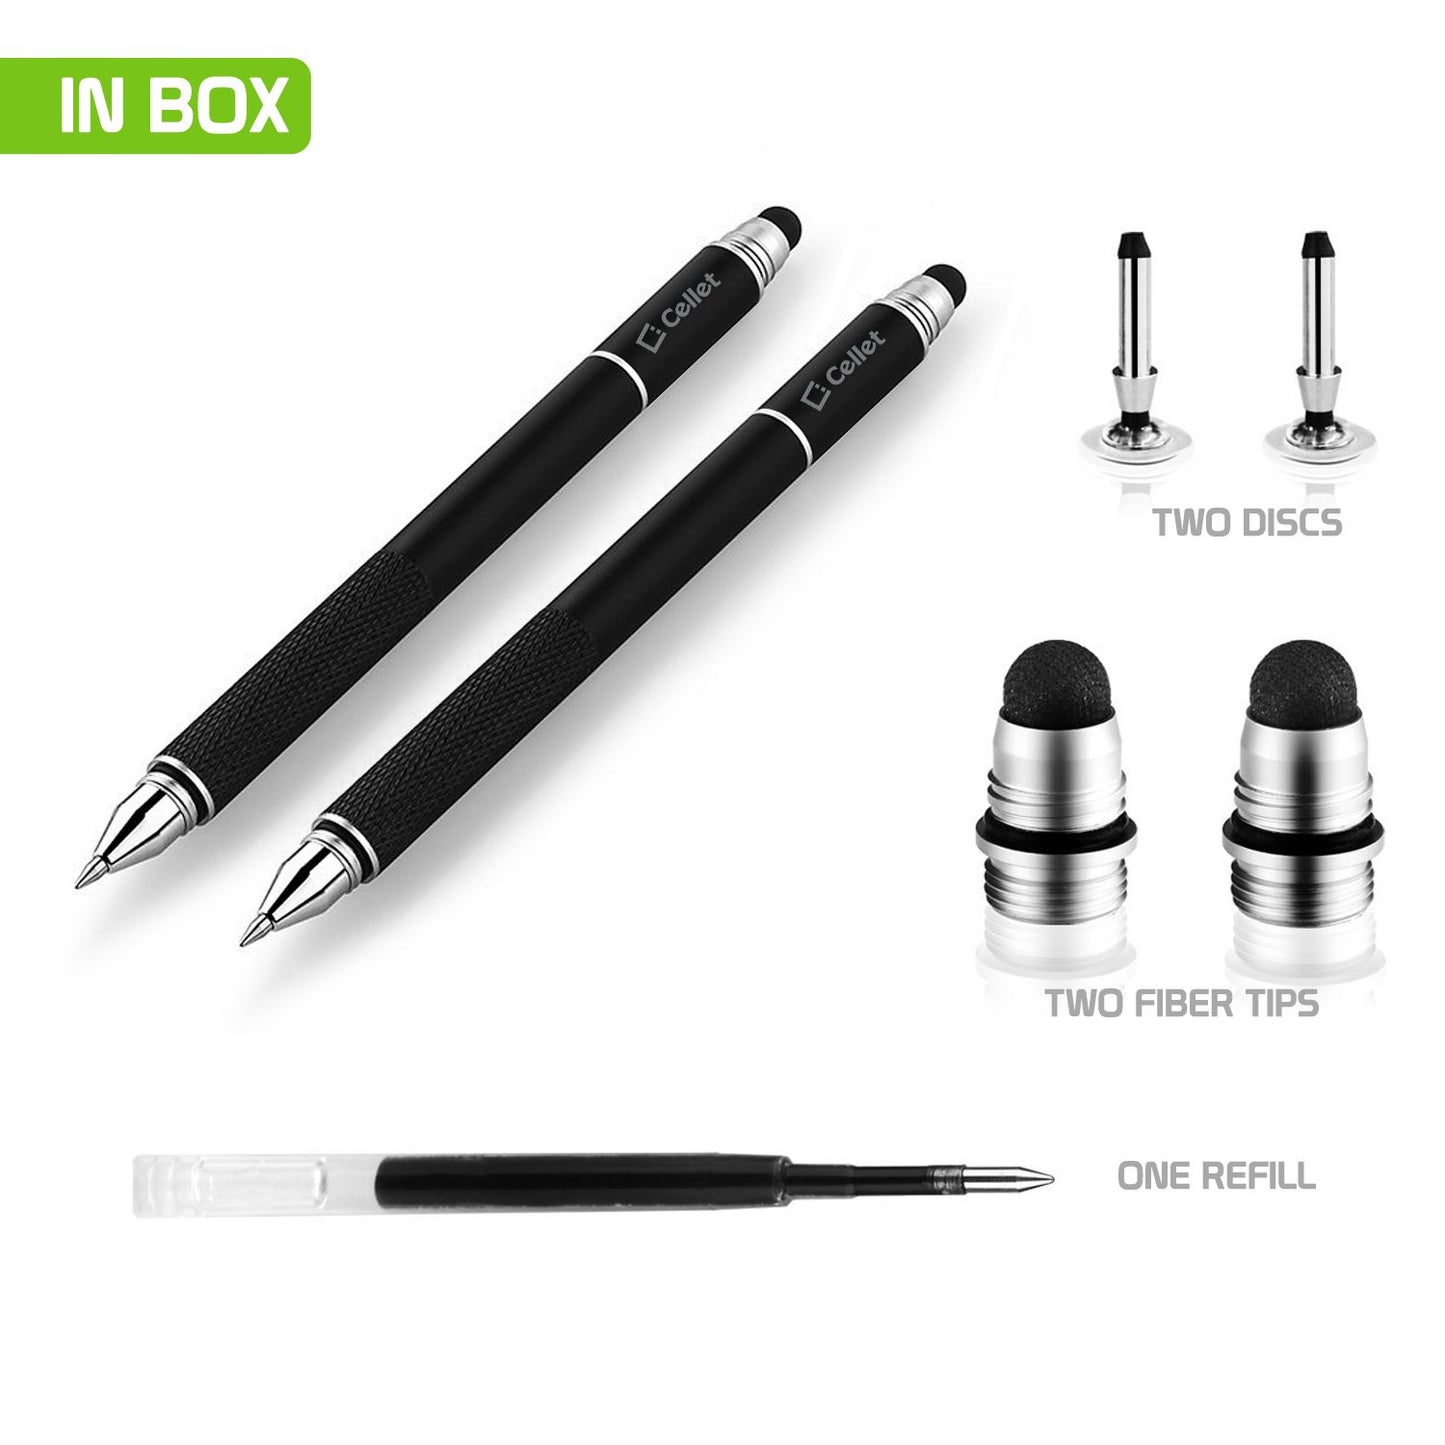 PENDISCBK - 3 in 1 Stylus Pen (Ballpoint Pen, Precision Clear Disc Pen, Capacitive Stylus Pen), 2 Stylus Pens with Replacement Tips - Black